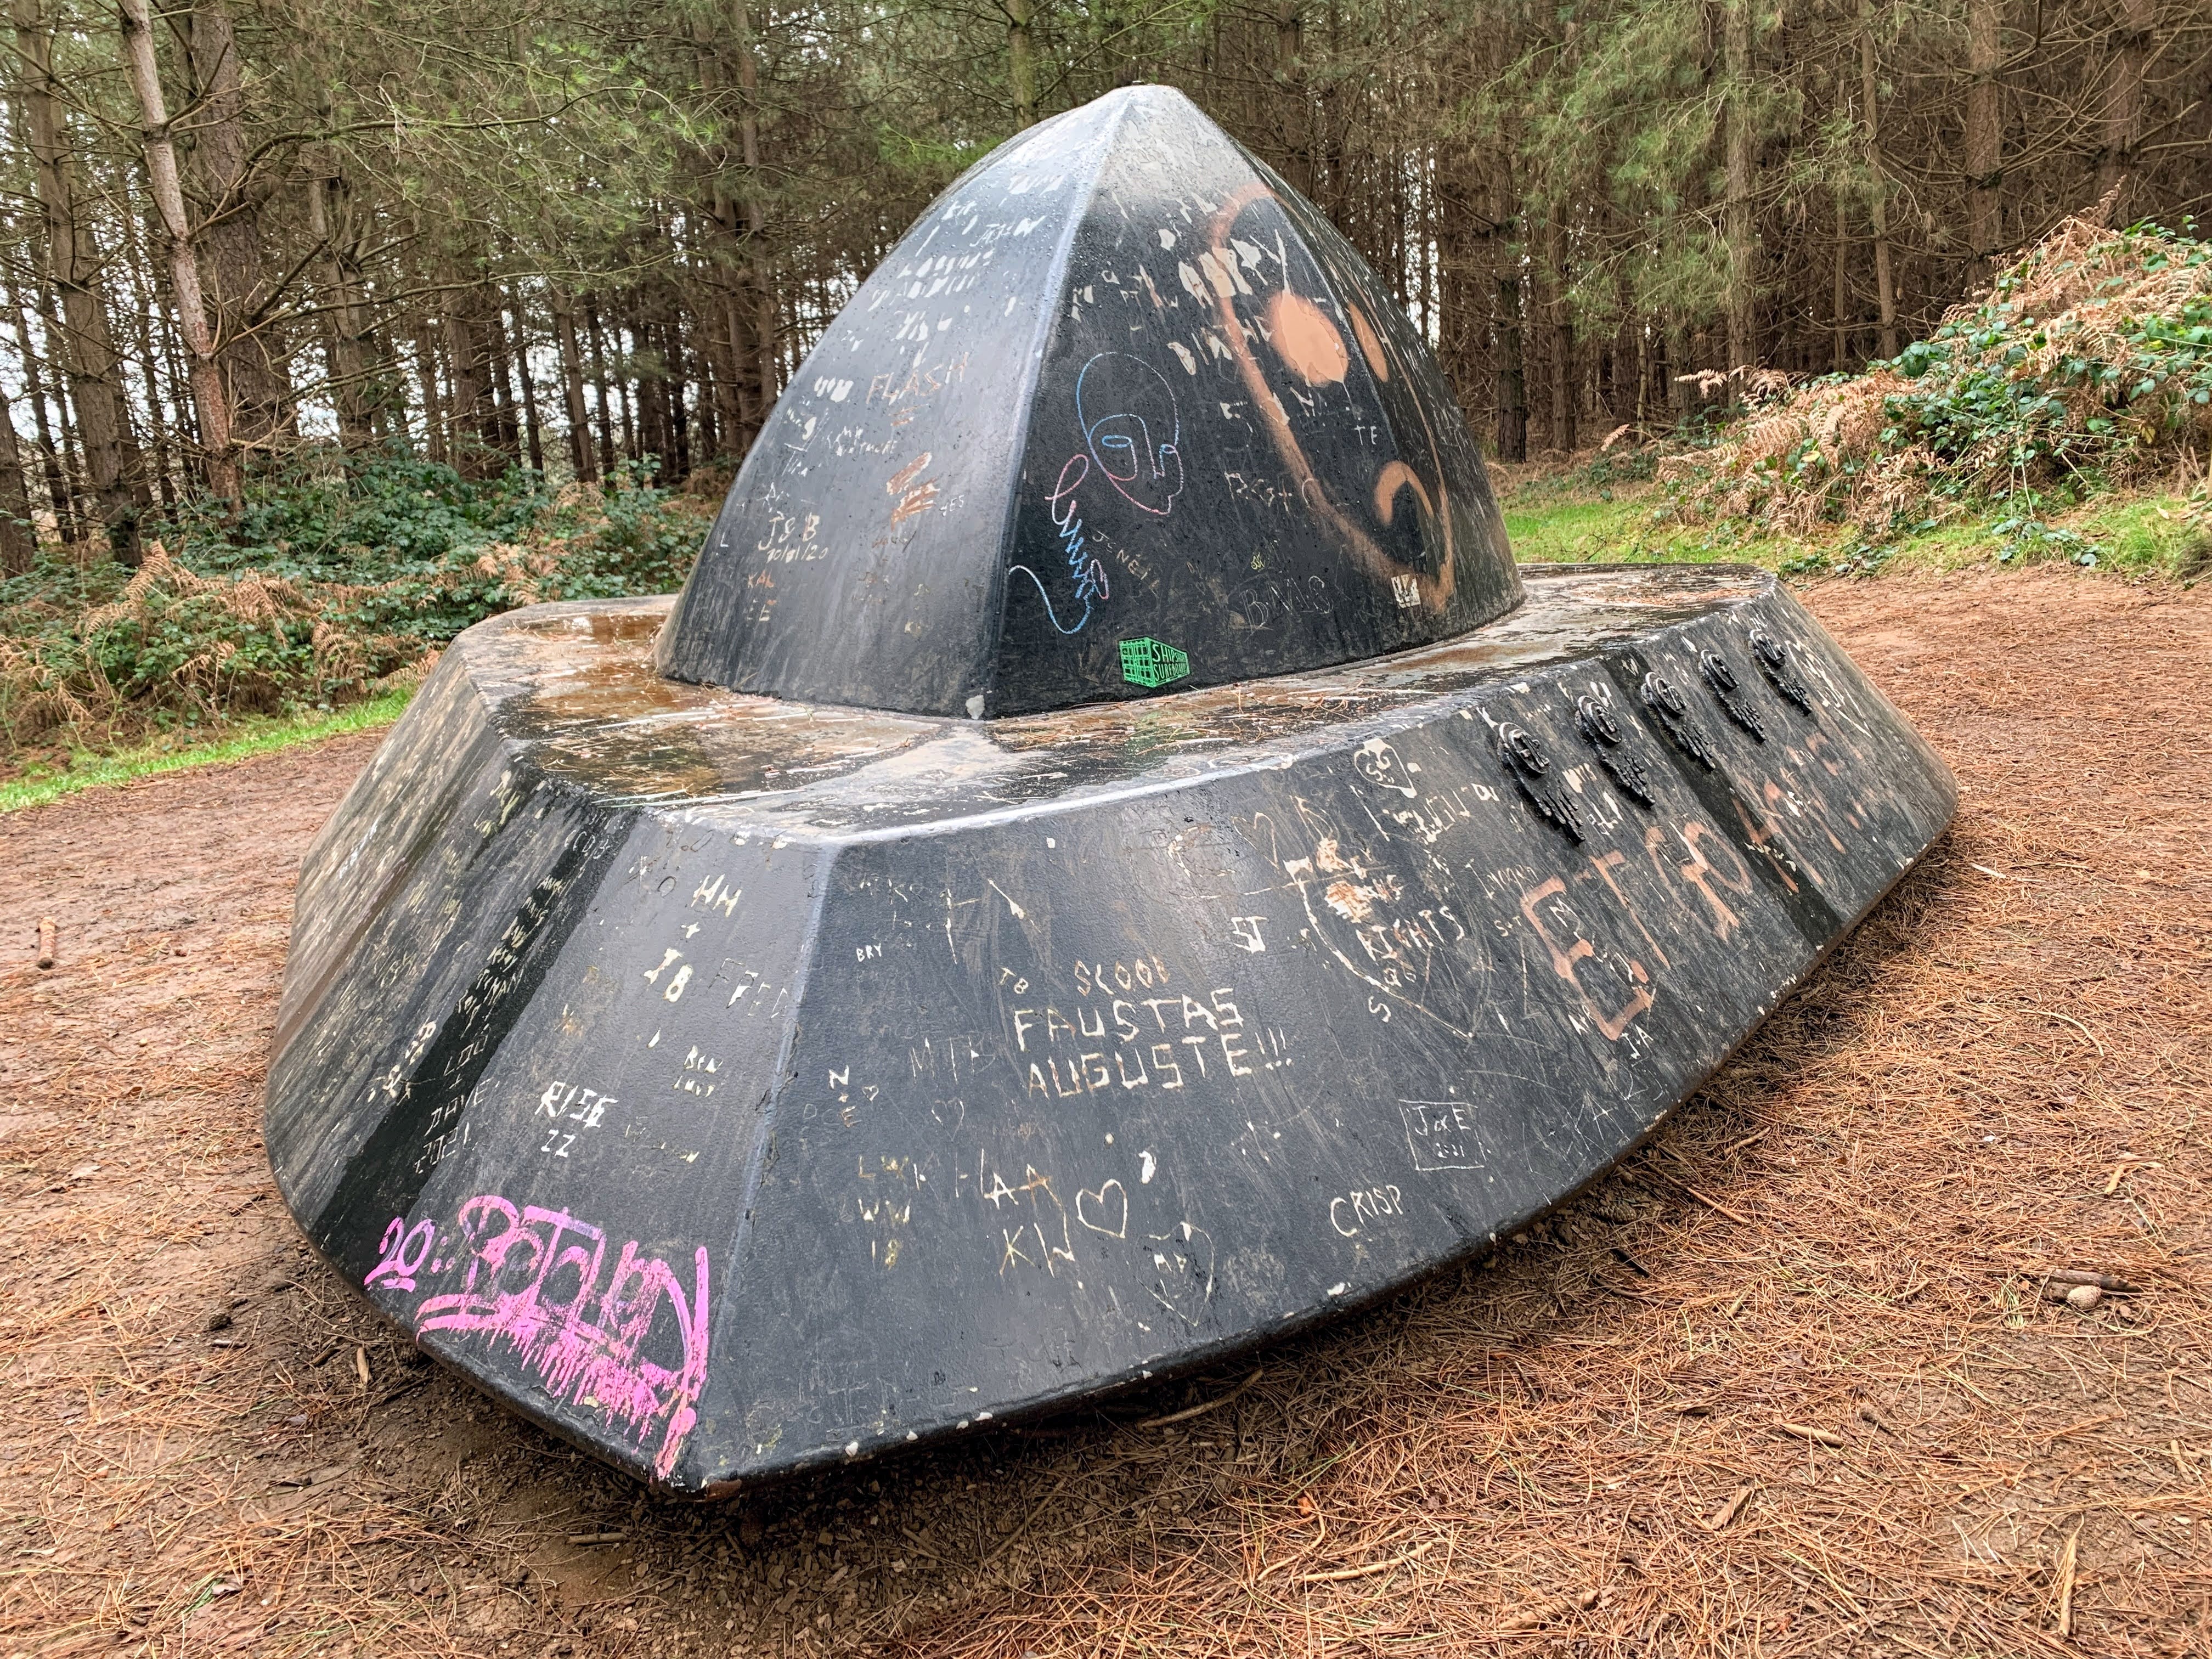 One of England’s most prominent UFO sightings is commemorated with a sculpture